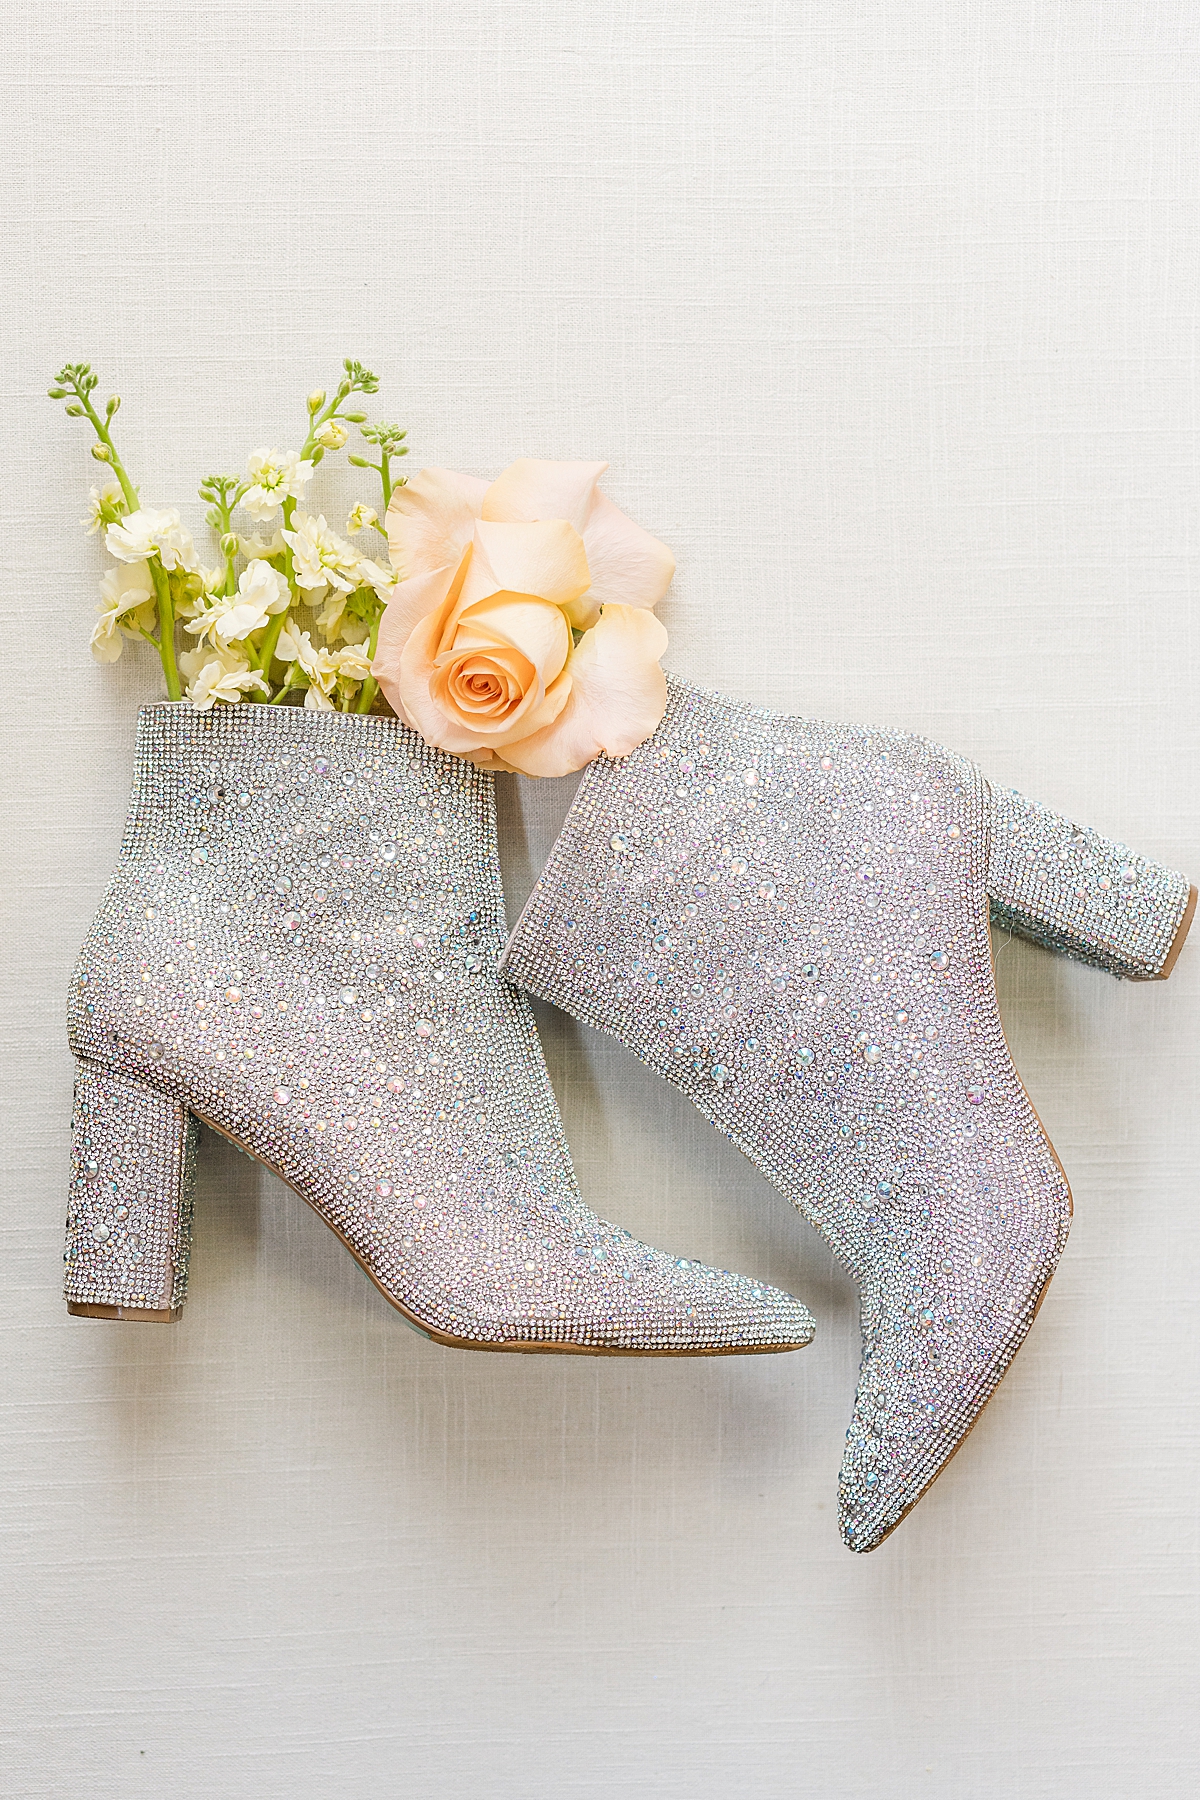 Betsey Johnson crystal boots with flowers